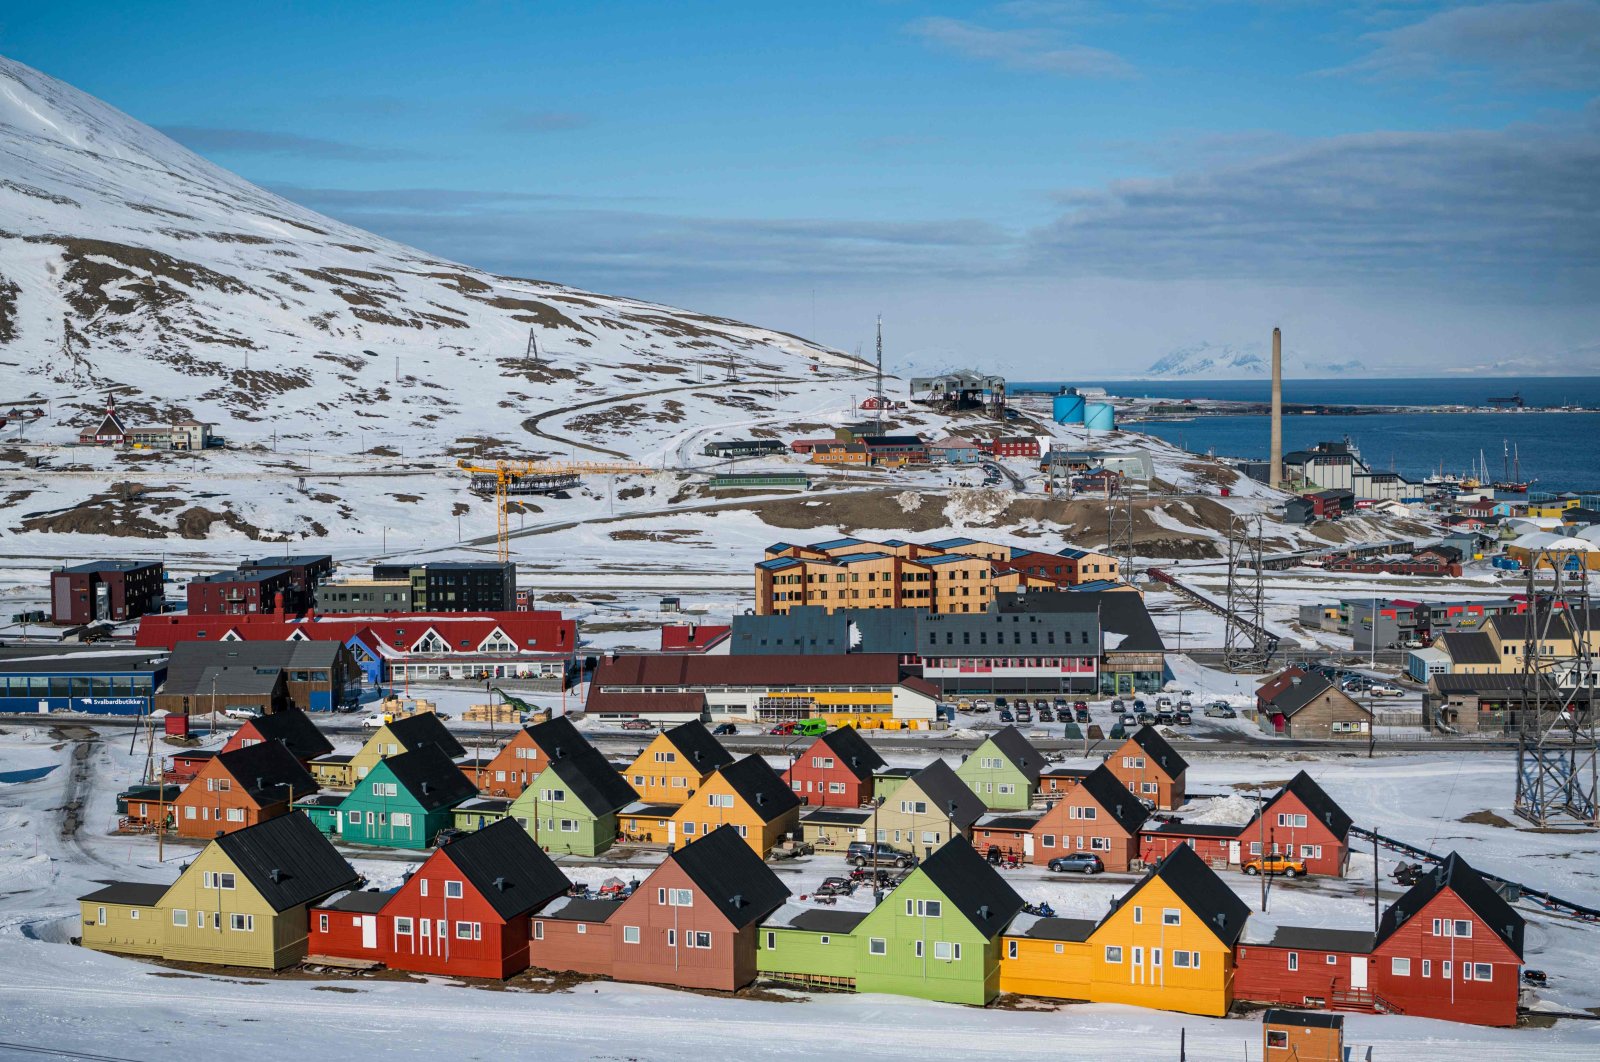 This file photo shows a general view of Longyearbyen, located on Spitsbergen island, Svalbard Archipelago, northern Norway, May 6, 2022. (AFP Photo)